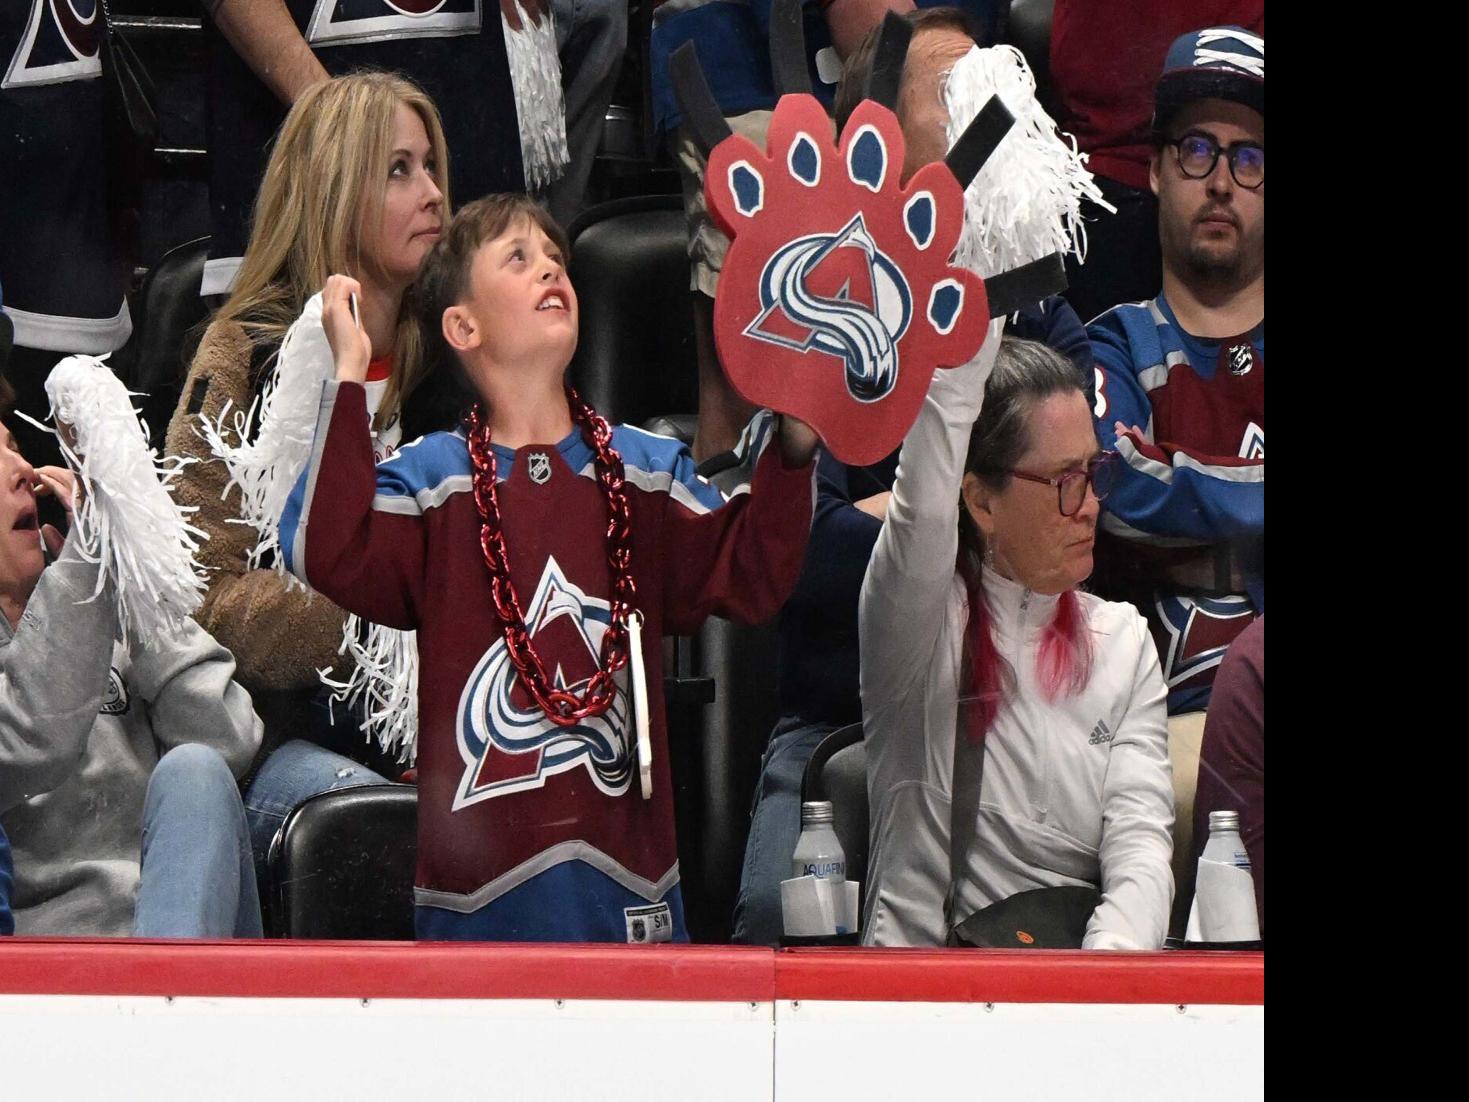 Colorado Avalanche: The Ins and Outs of Being a Female Hockey Fan